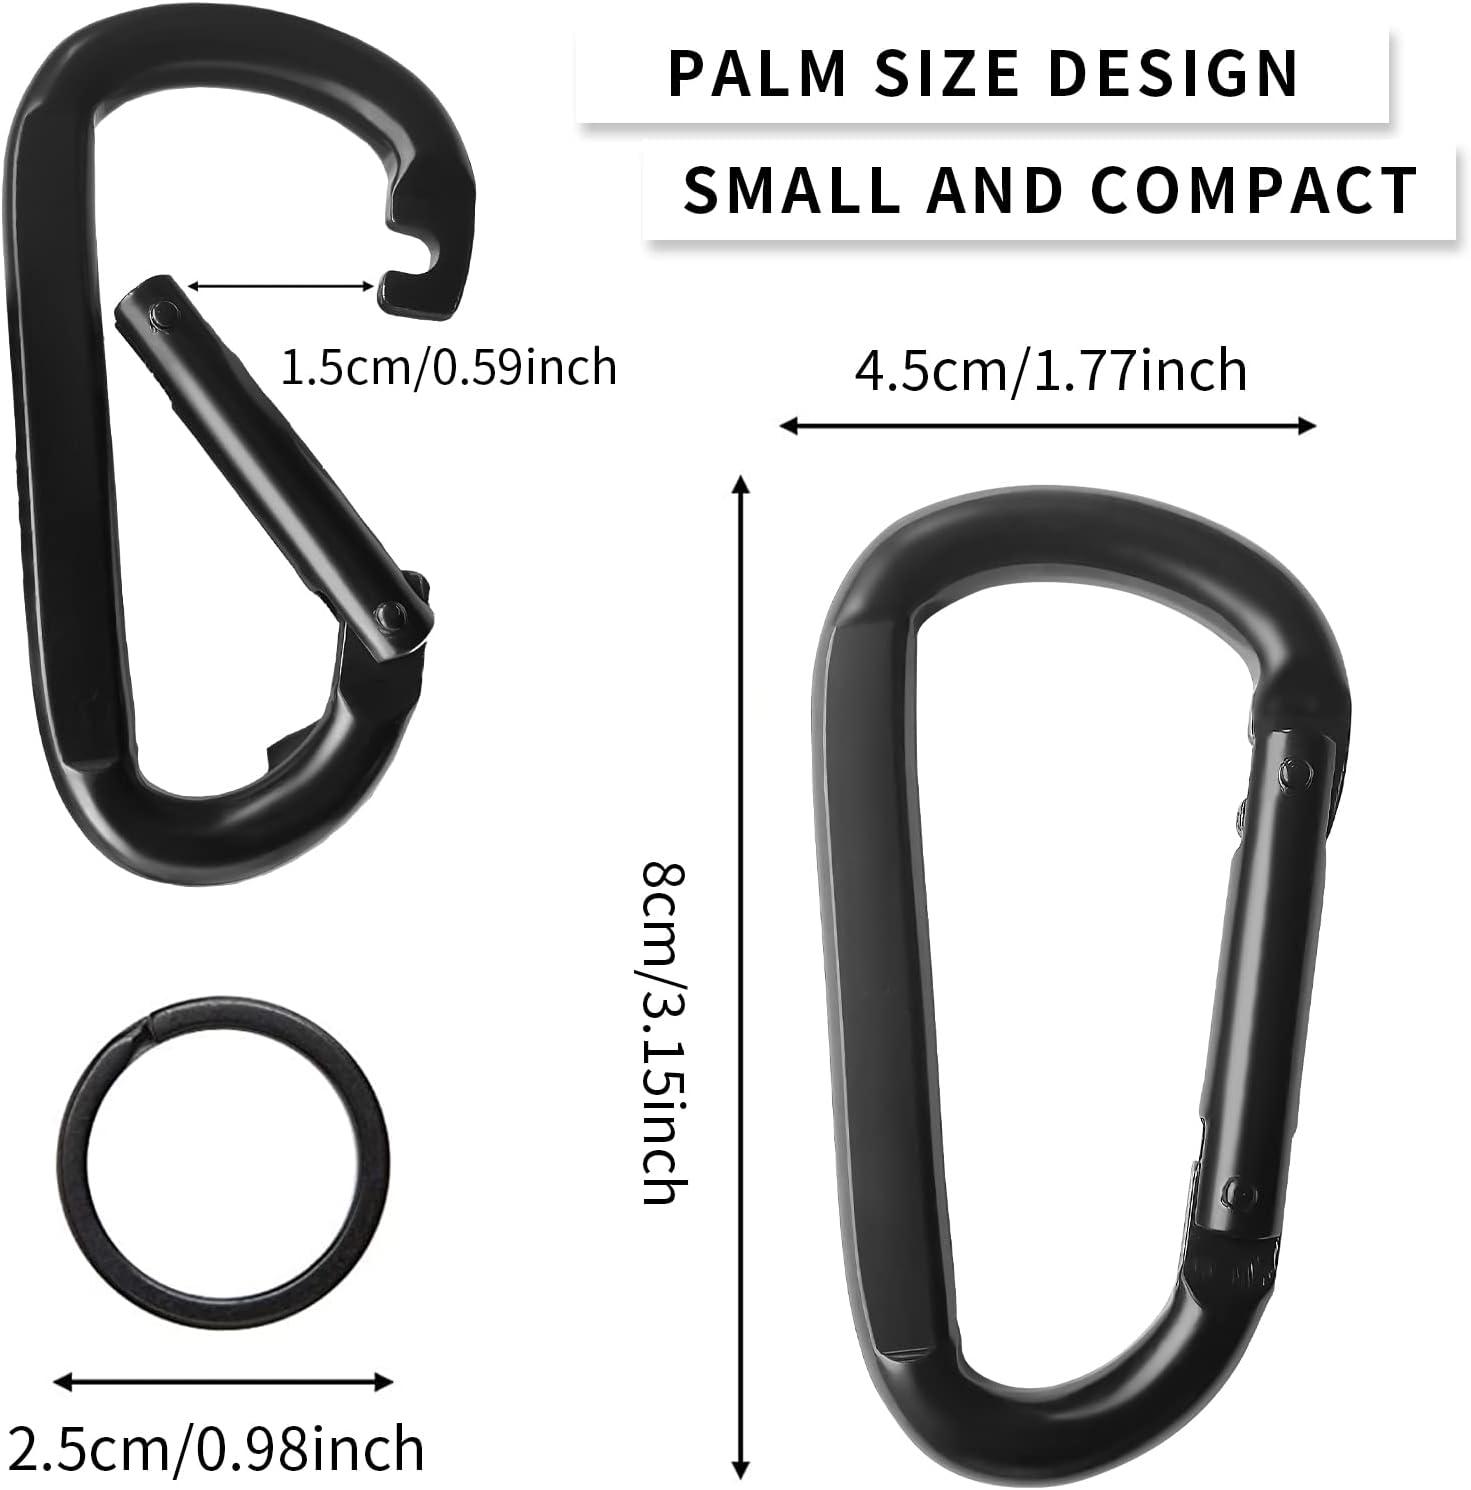 Carabiner Clip, 3 Heavy Duty Small Carabiner for Hammocks, Camping  Accessories, Hiking, Keychains, 880 lbs, Black 2